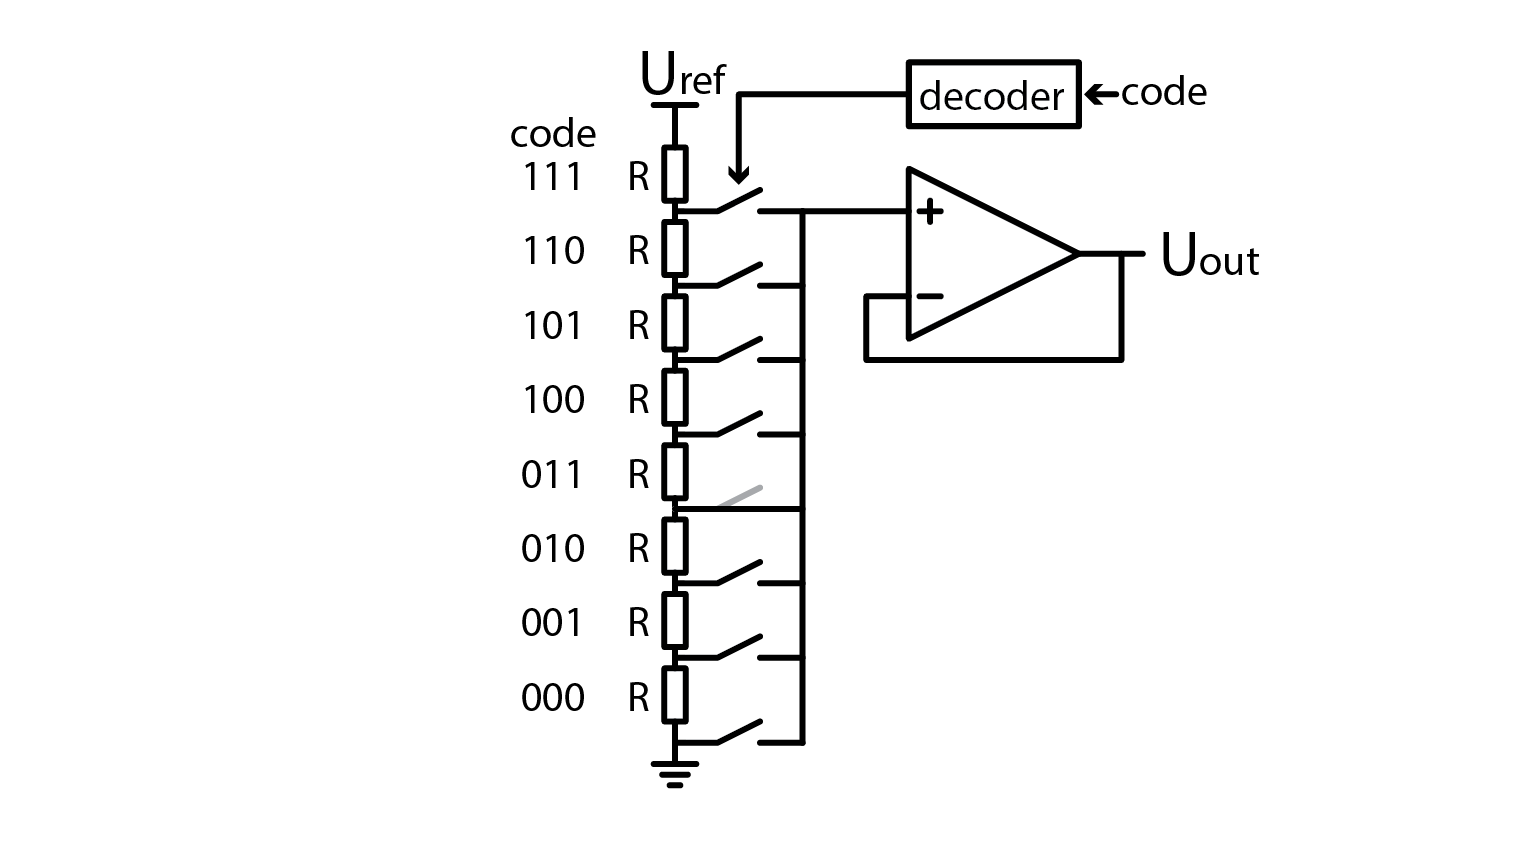 ../../_images/13_resistor_DAC_schematic.png